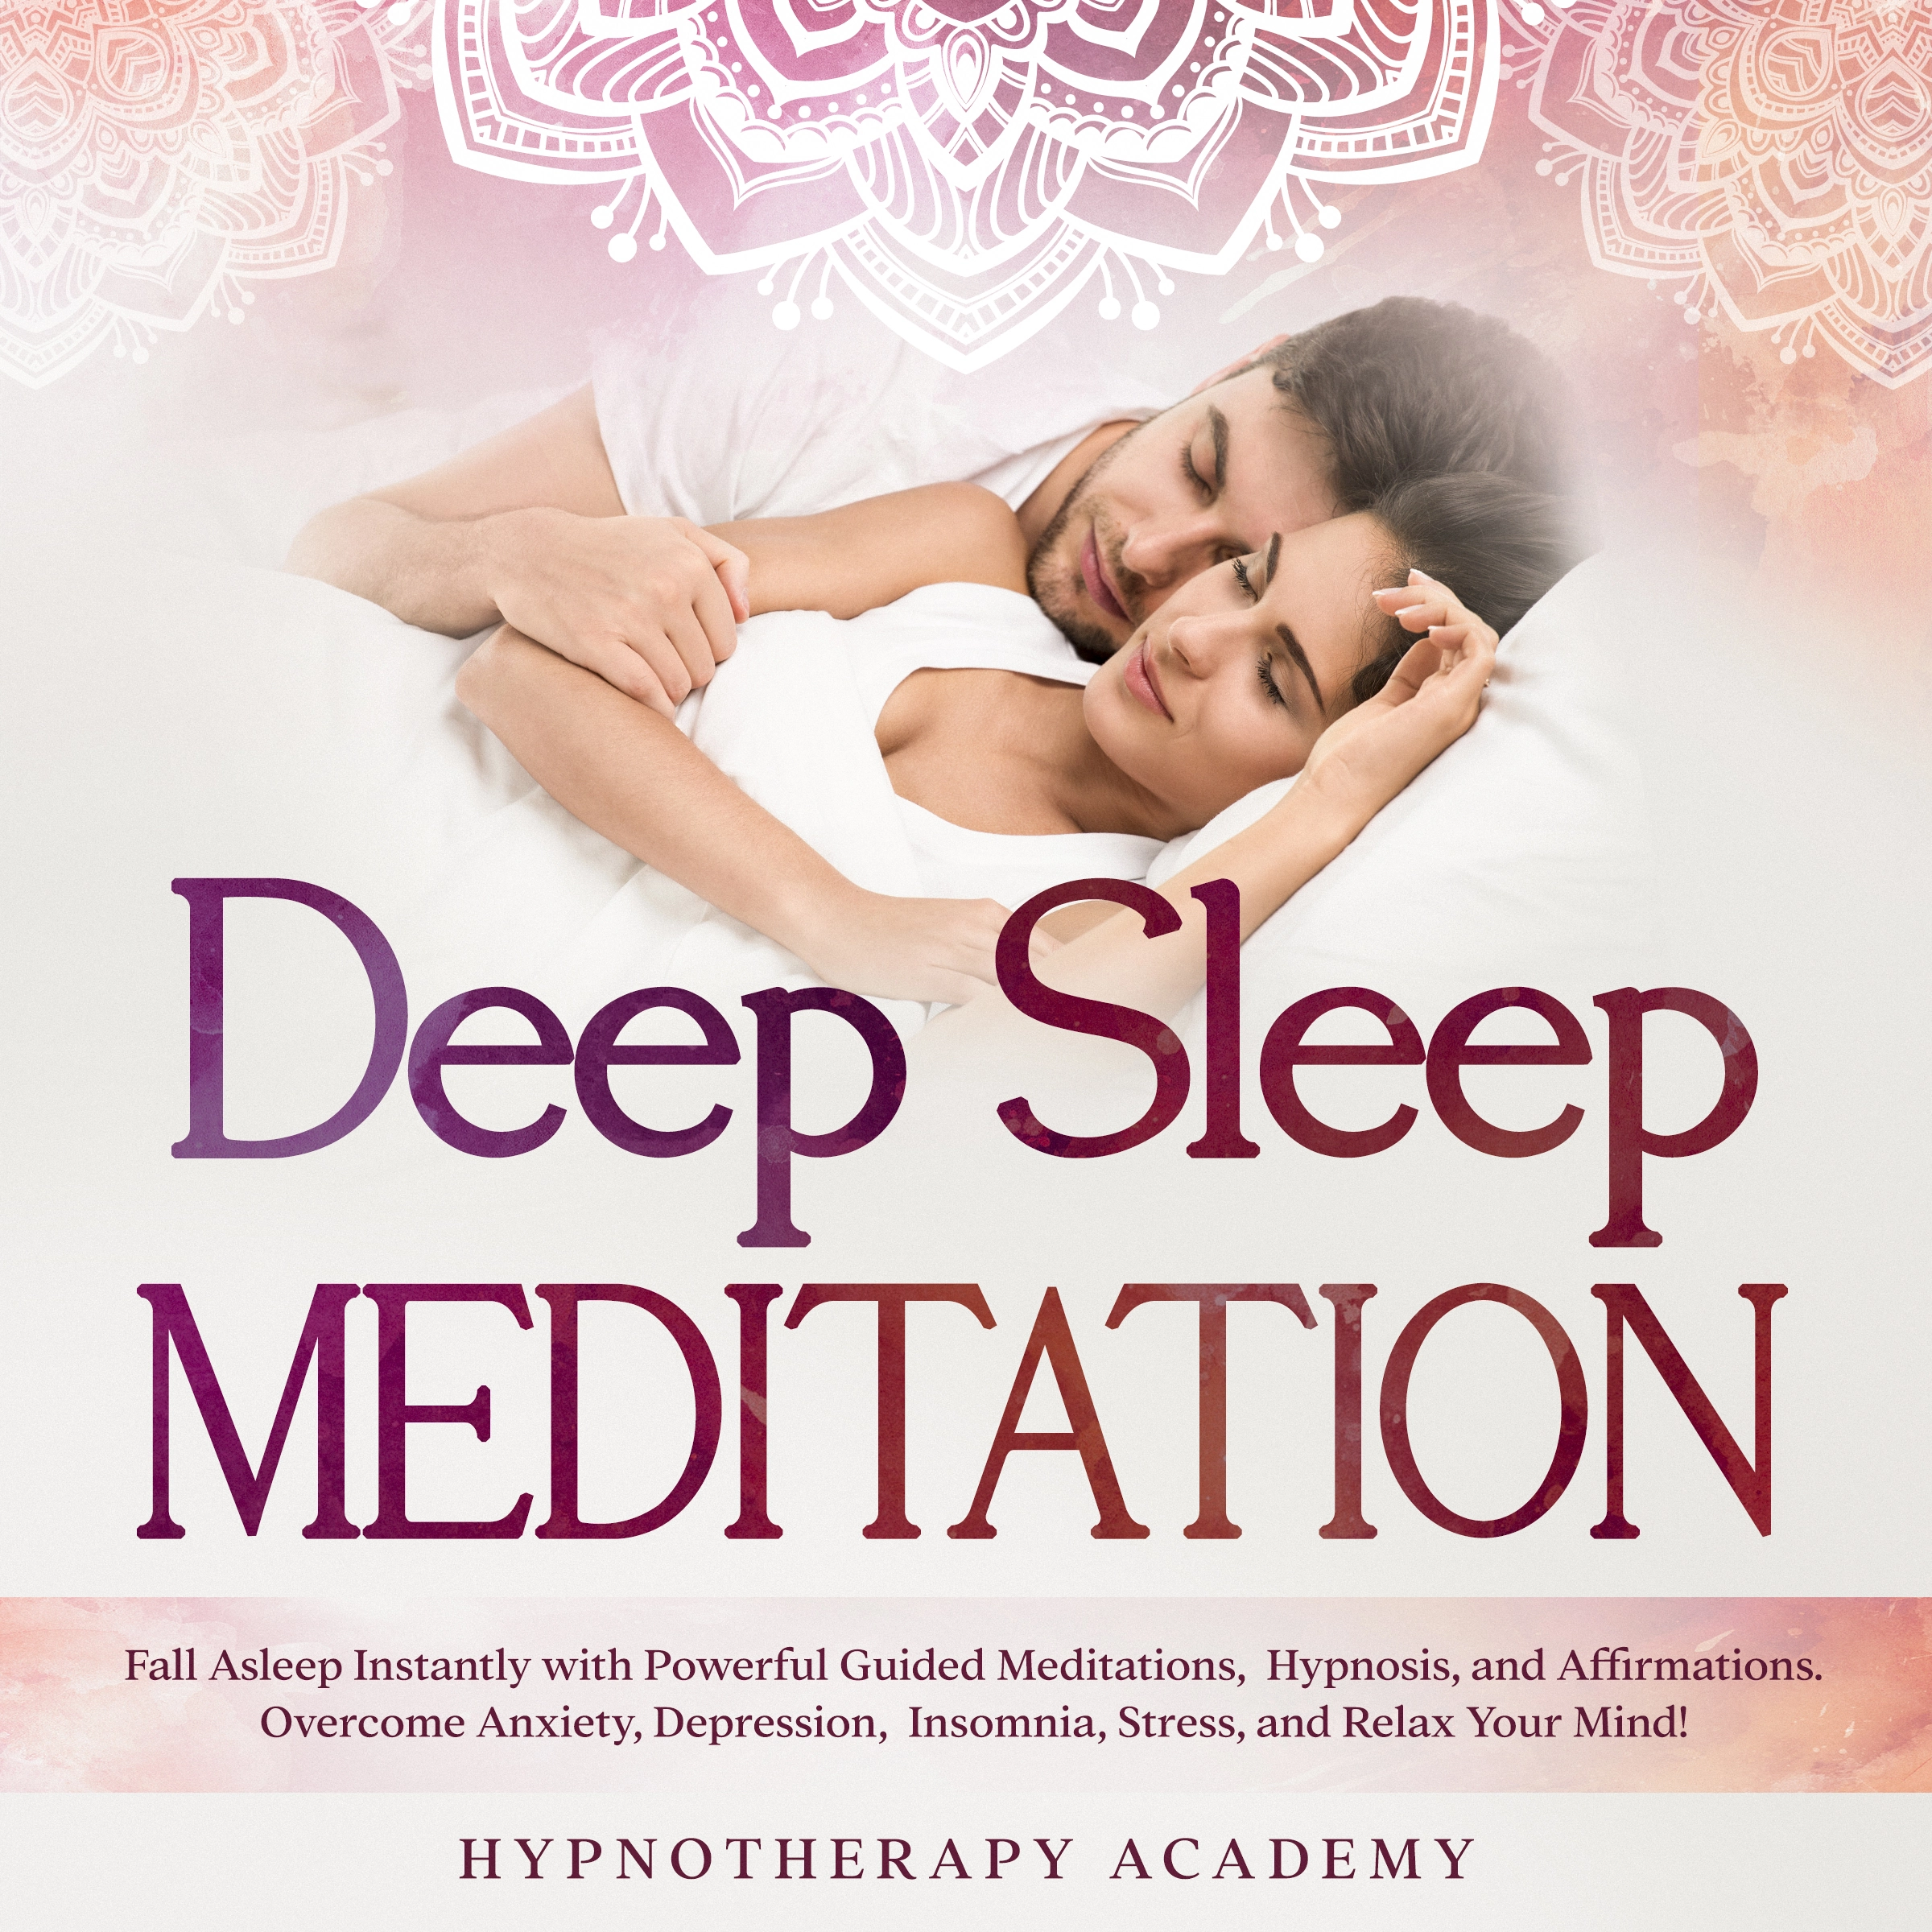 Deep Sleep Meditation: Fall Asleep Instantly with Powerful Guided Meditations, Hypnosis, and Affirmations. Overcome Anxiety, Depression, Insomnia, Stress, and Relax Your Mind! Audiobook by Hypnotherapy Academy